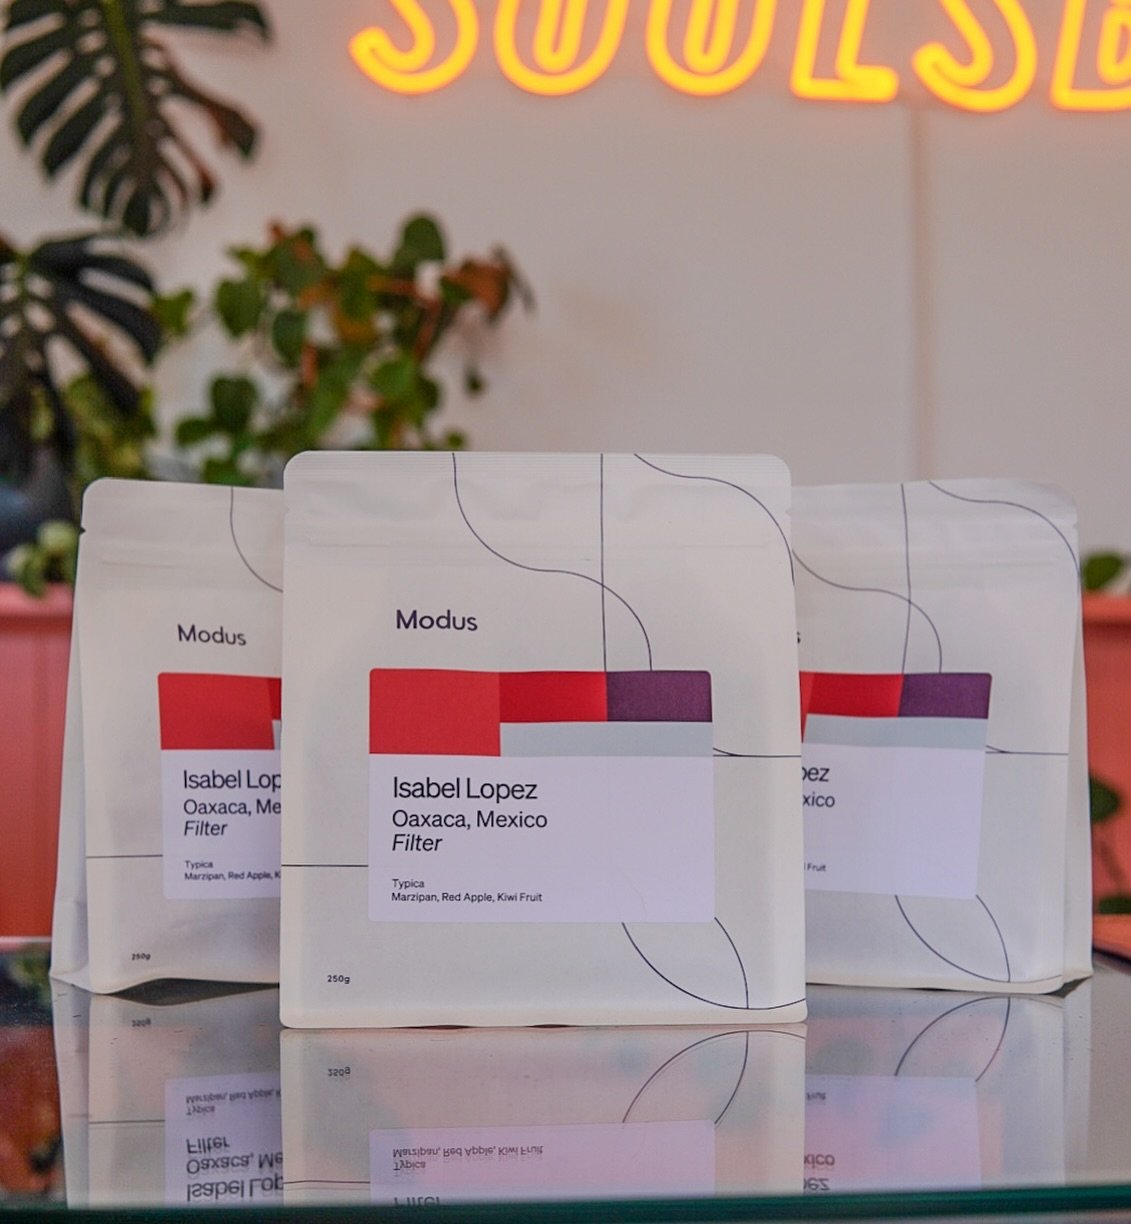 Now brewing!

Complimentary batch brew with any service at Soulsbys. ☕️

Forget to grab some beans whilst at the shops/cafe?
We got you sorted - @modus.coffee filter beans are also available for retail in-store! ✌️